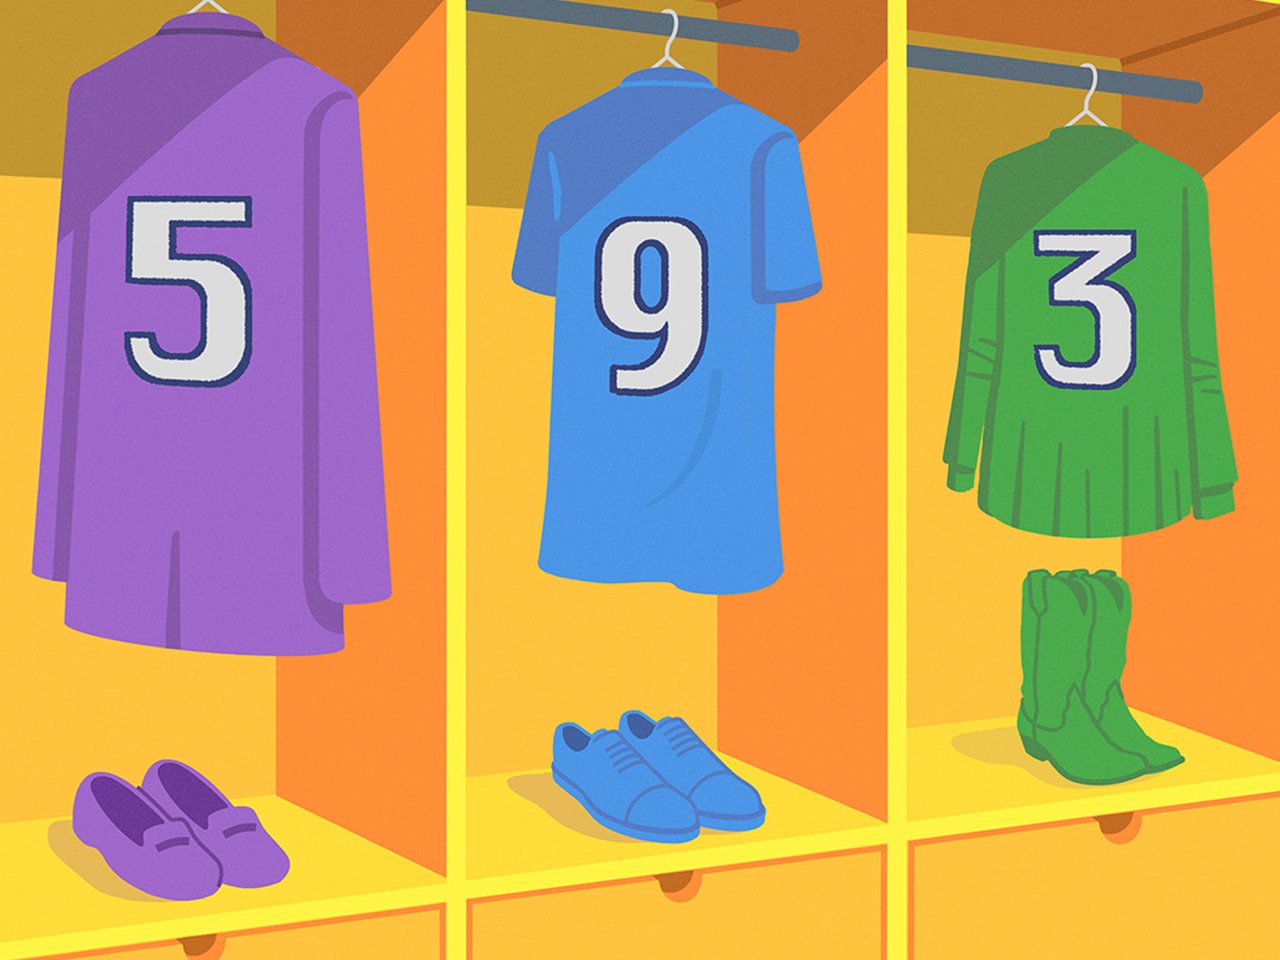 Illustration of different types of clothes hanging in lockers.